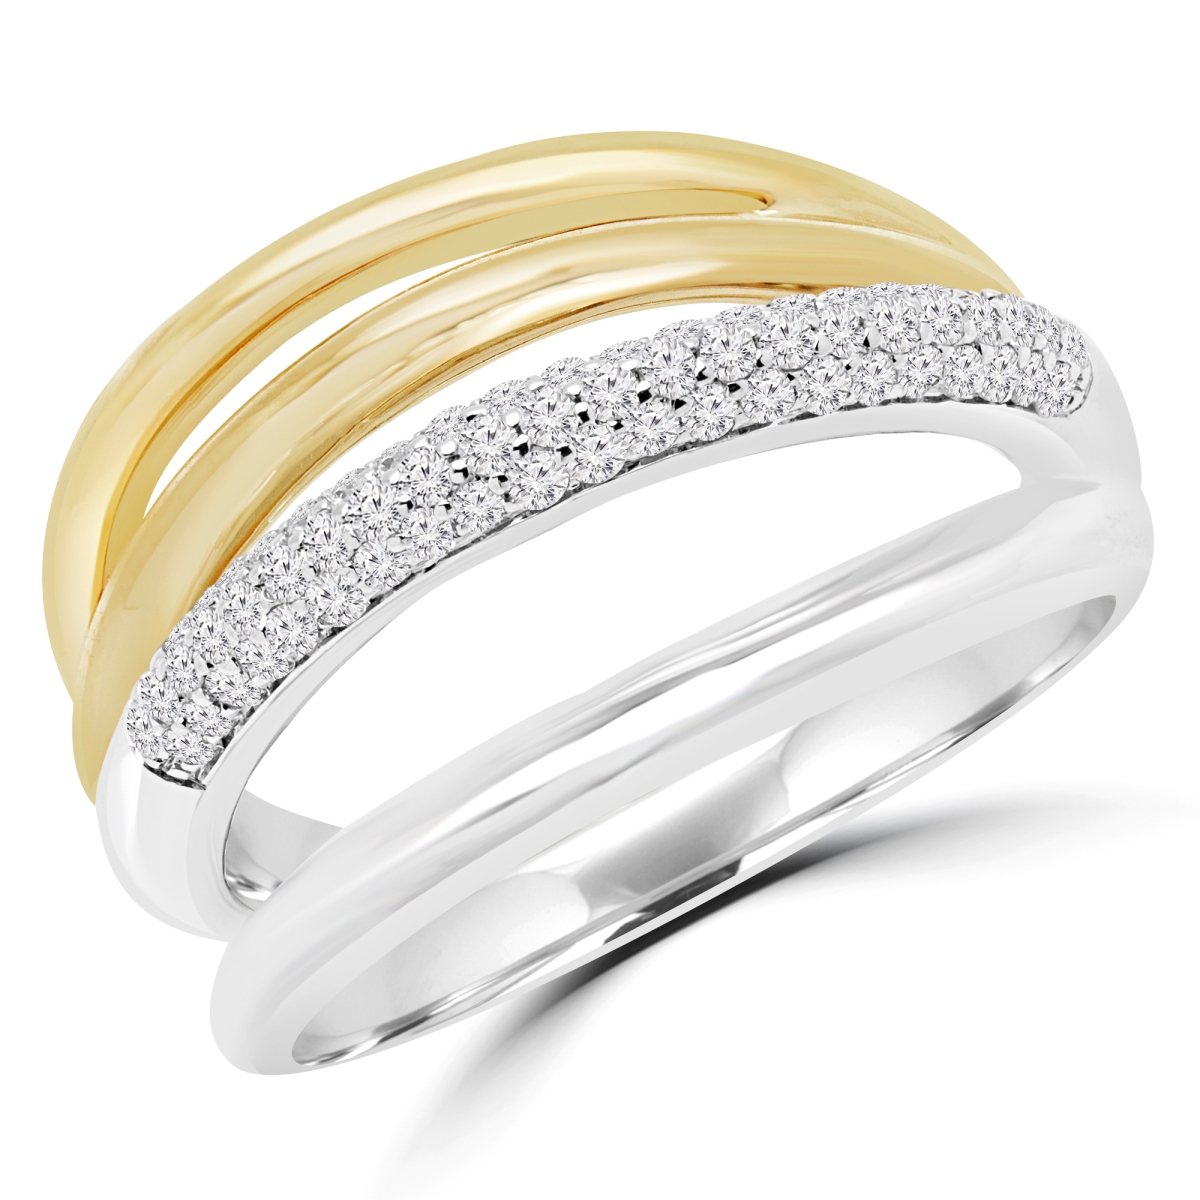 Picture of Majesty Diamonds MDR170050-6 0.37 CTW Round Diamond Cocktail Semi-Eternity Ring in 14K Two-Tone Gold - 6